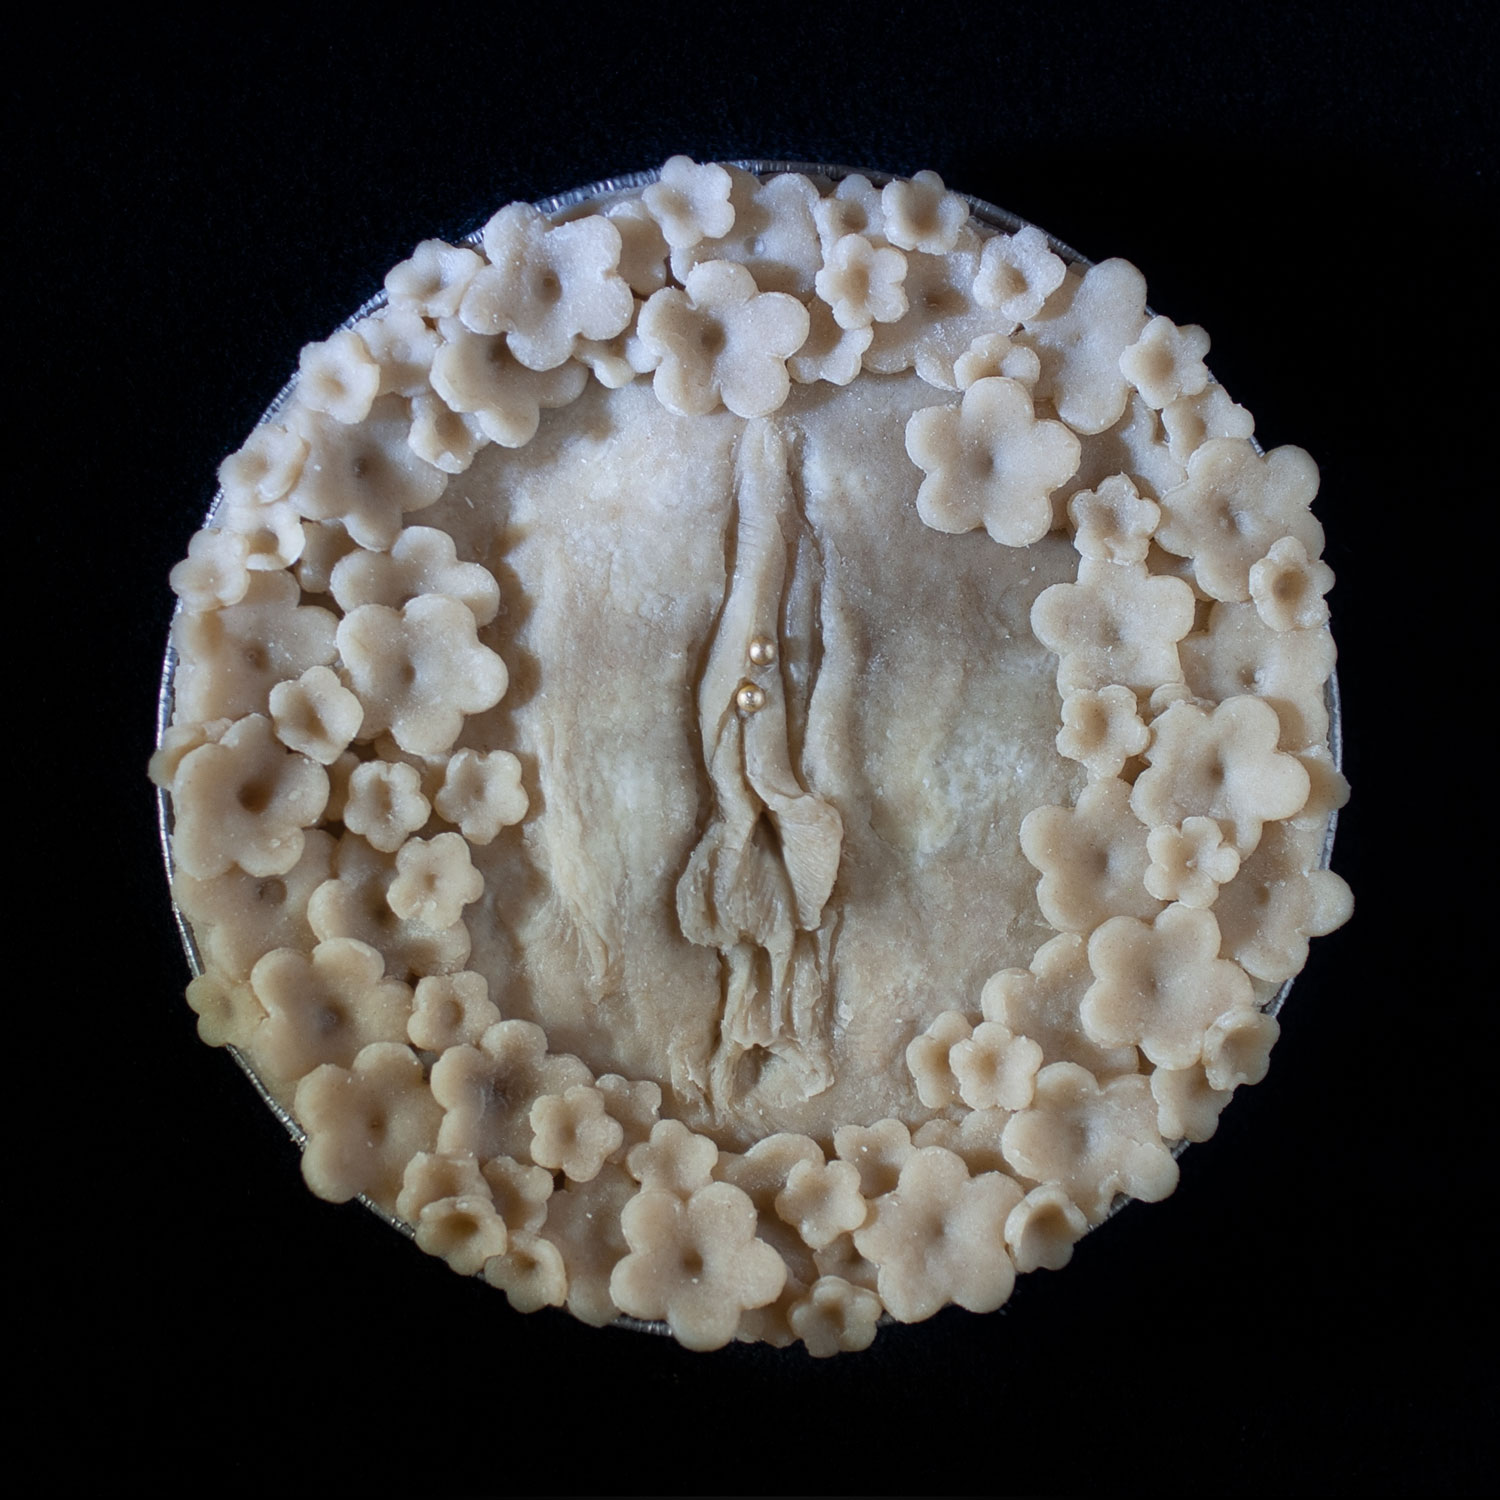 An unbaked artistic pie on a black background. The pie is decorated with hand sculpted vulva art and blossoms surrounding it. 